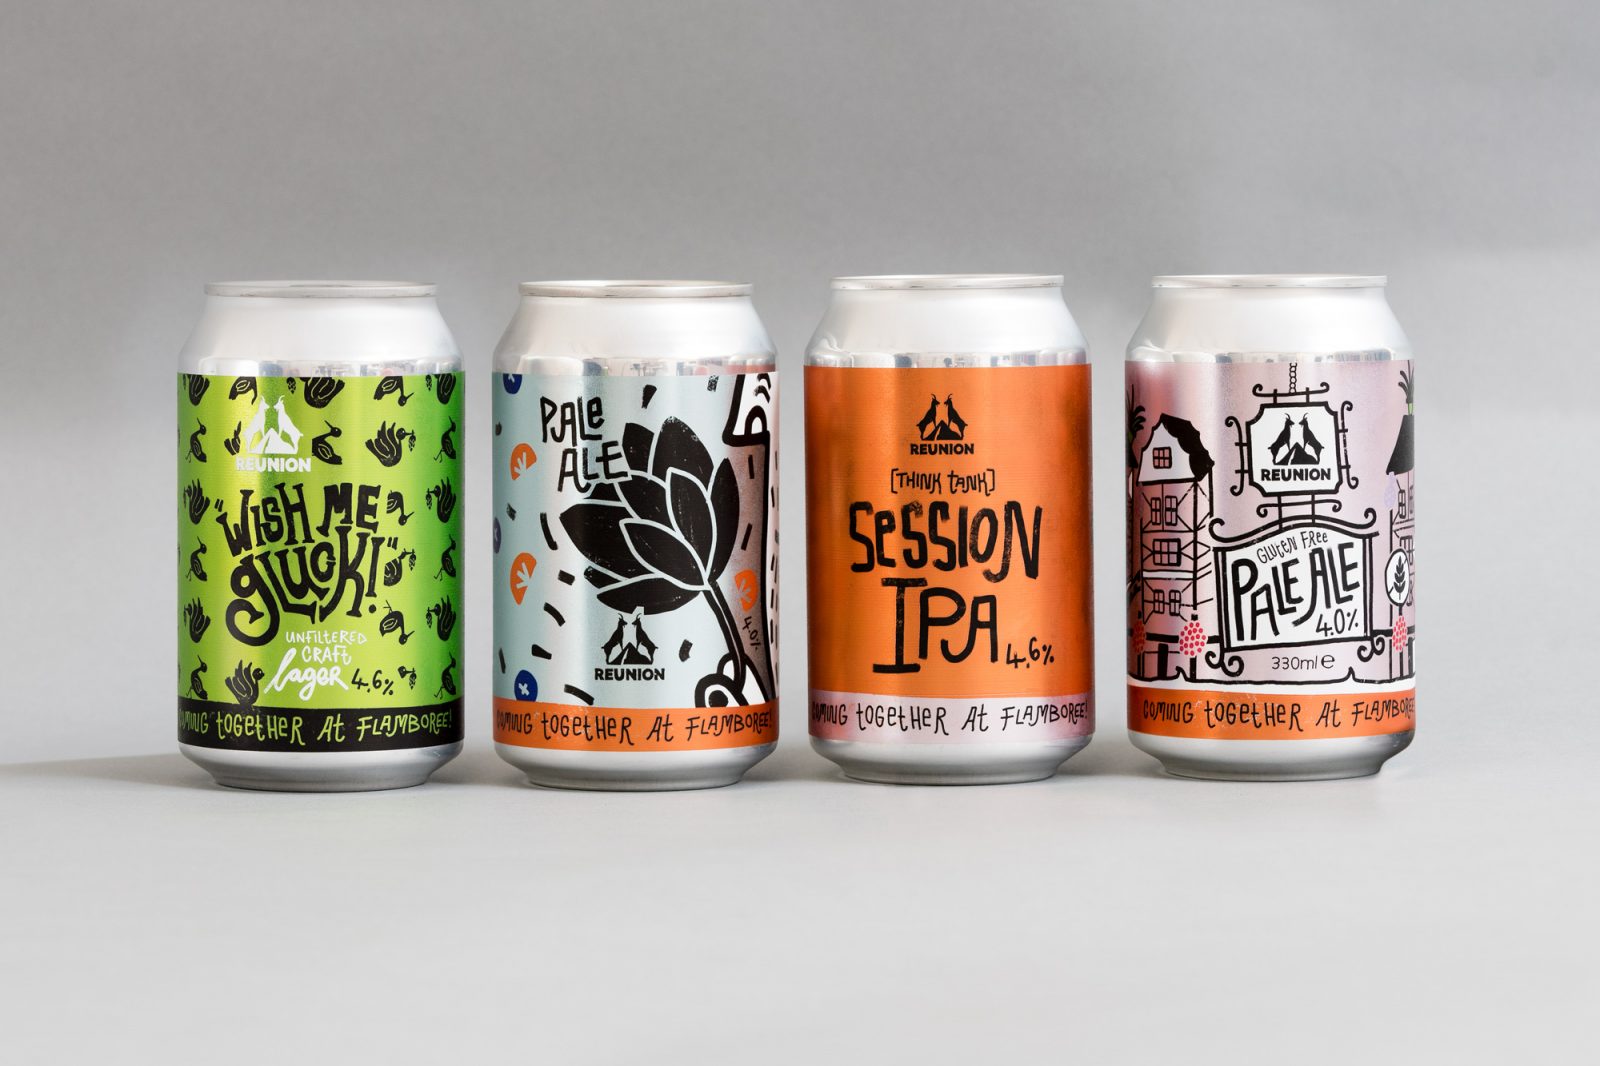 In-Store Exclusive Reunion Ales x Flamboree! Collaboration Cans by SAINT Design